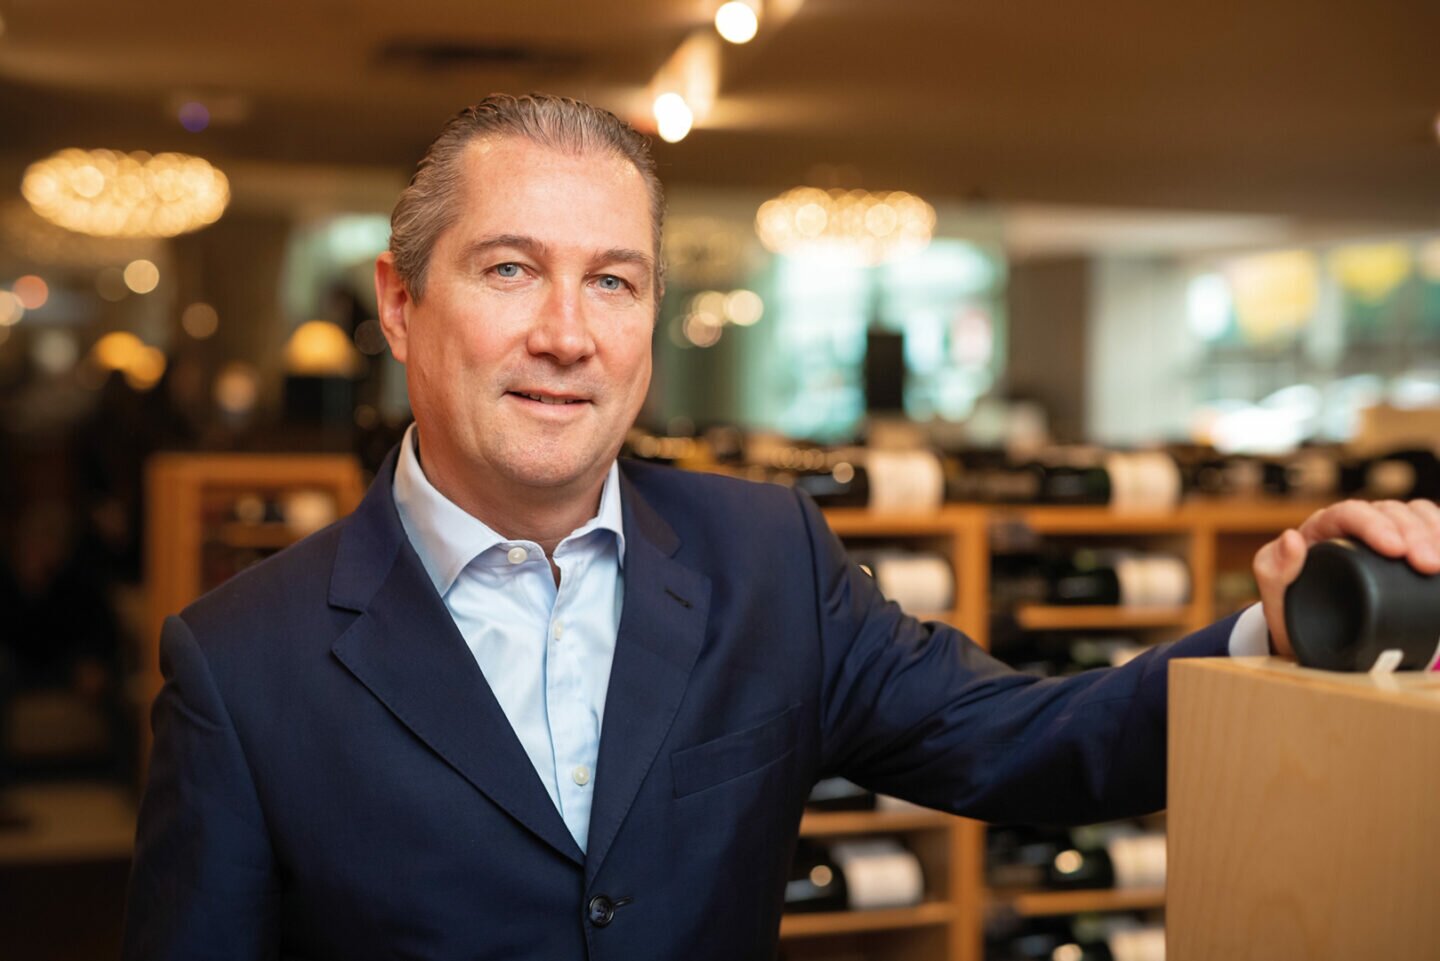 He Sells The World’s Most Expensive Wines And Spirits For Charity